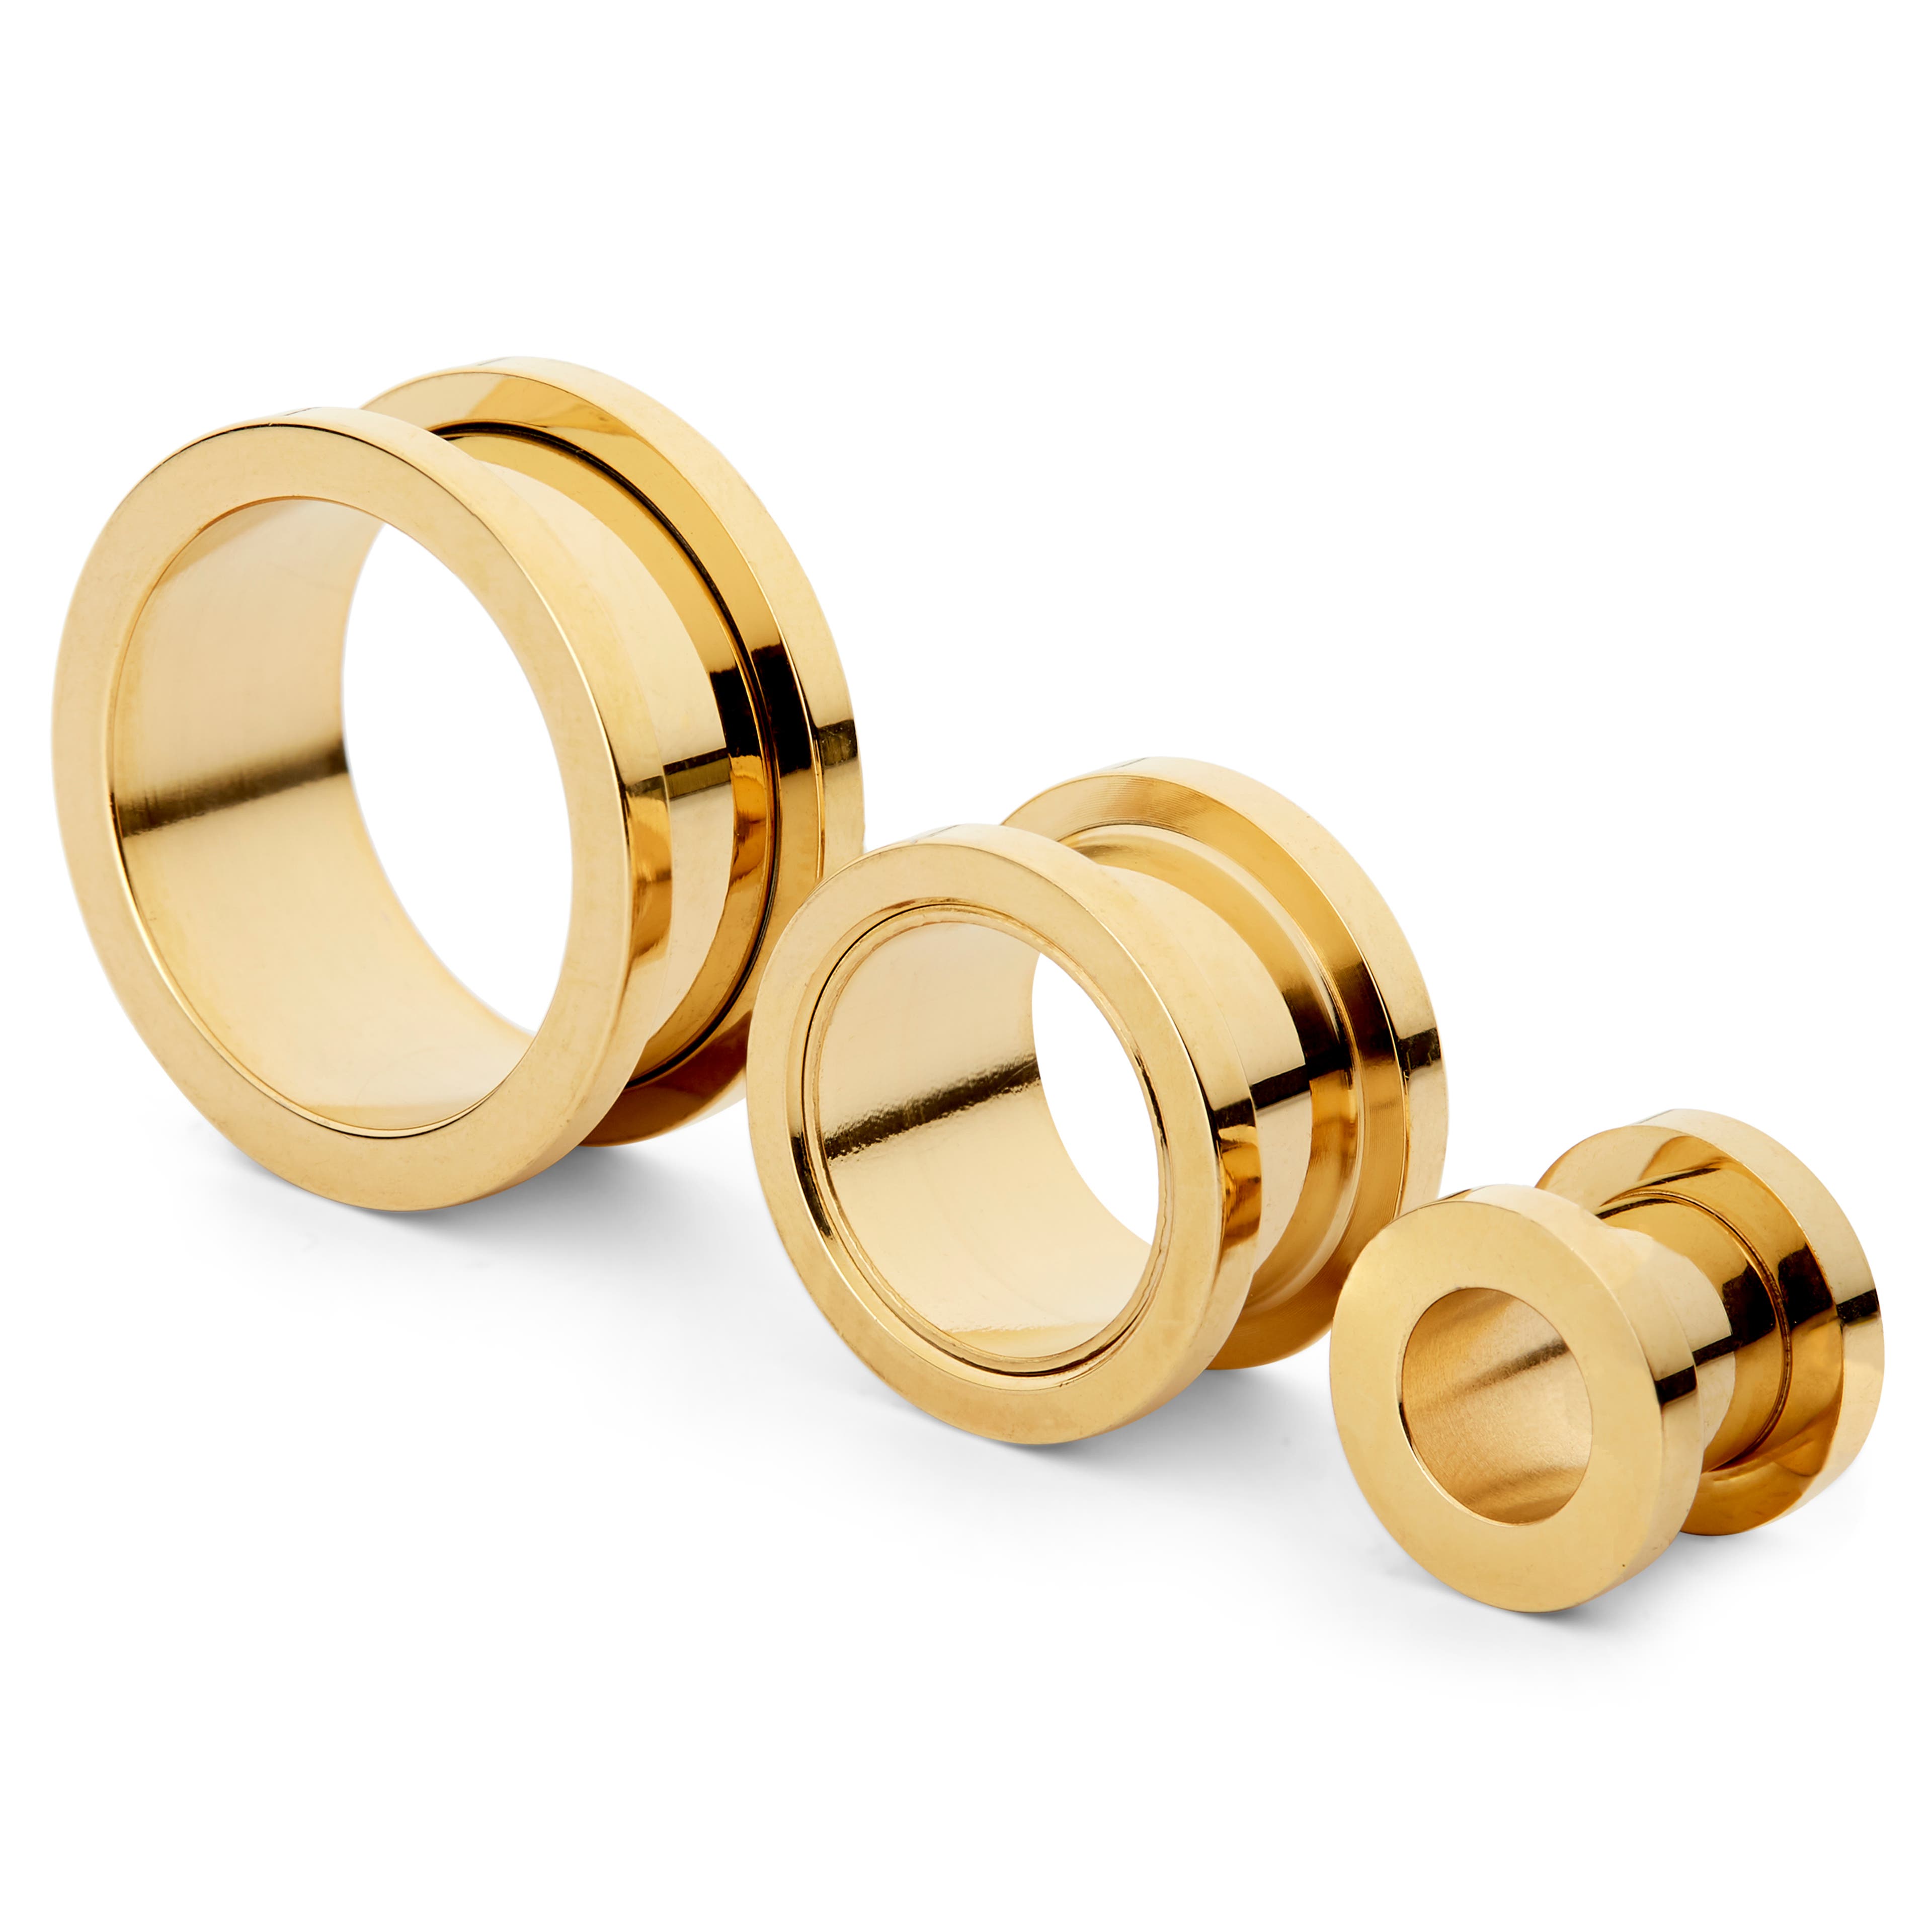 Gold-Tone Thick-Rimmed Screw-Fit Tunnel Earring